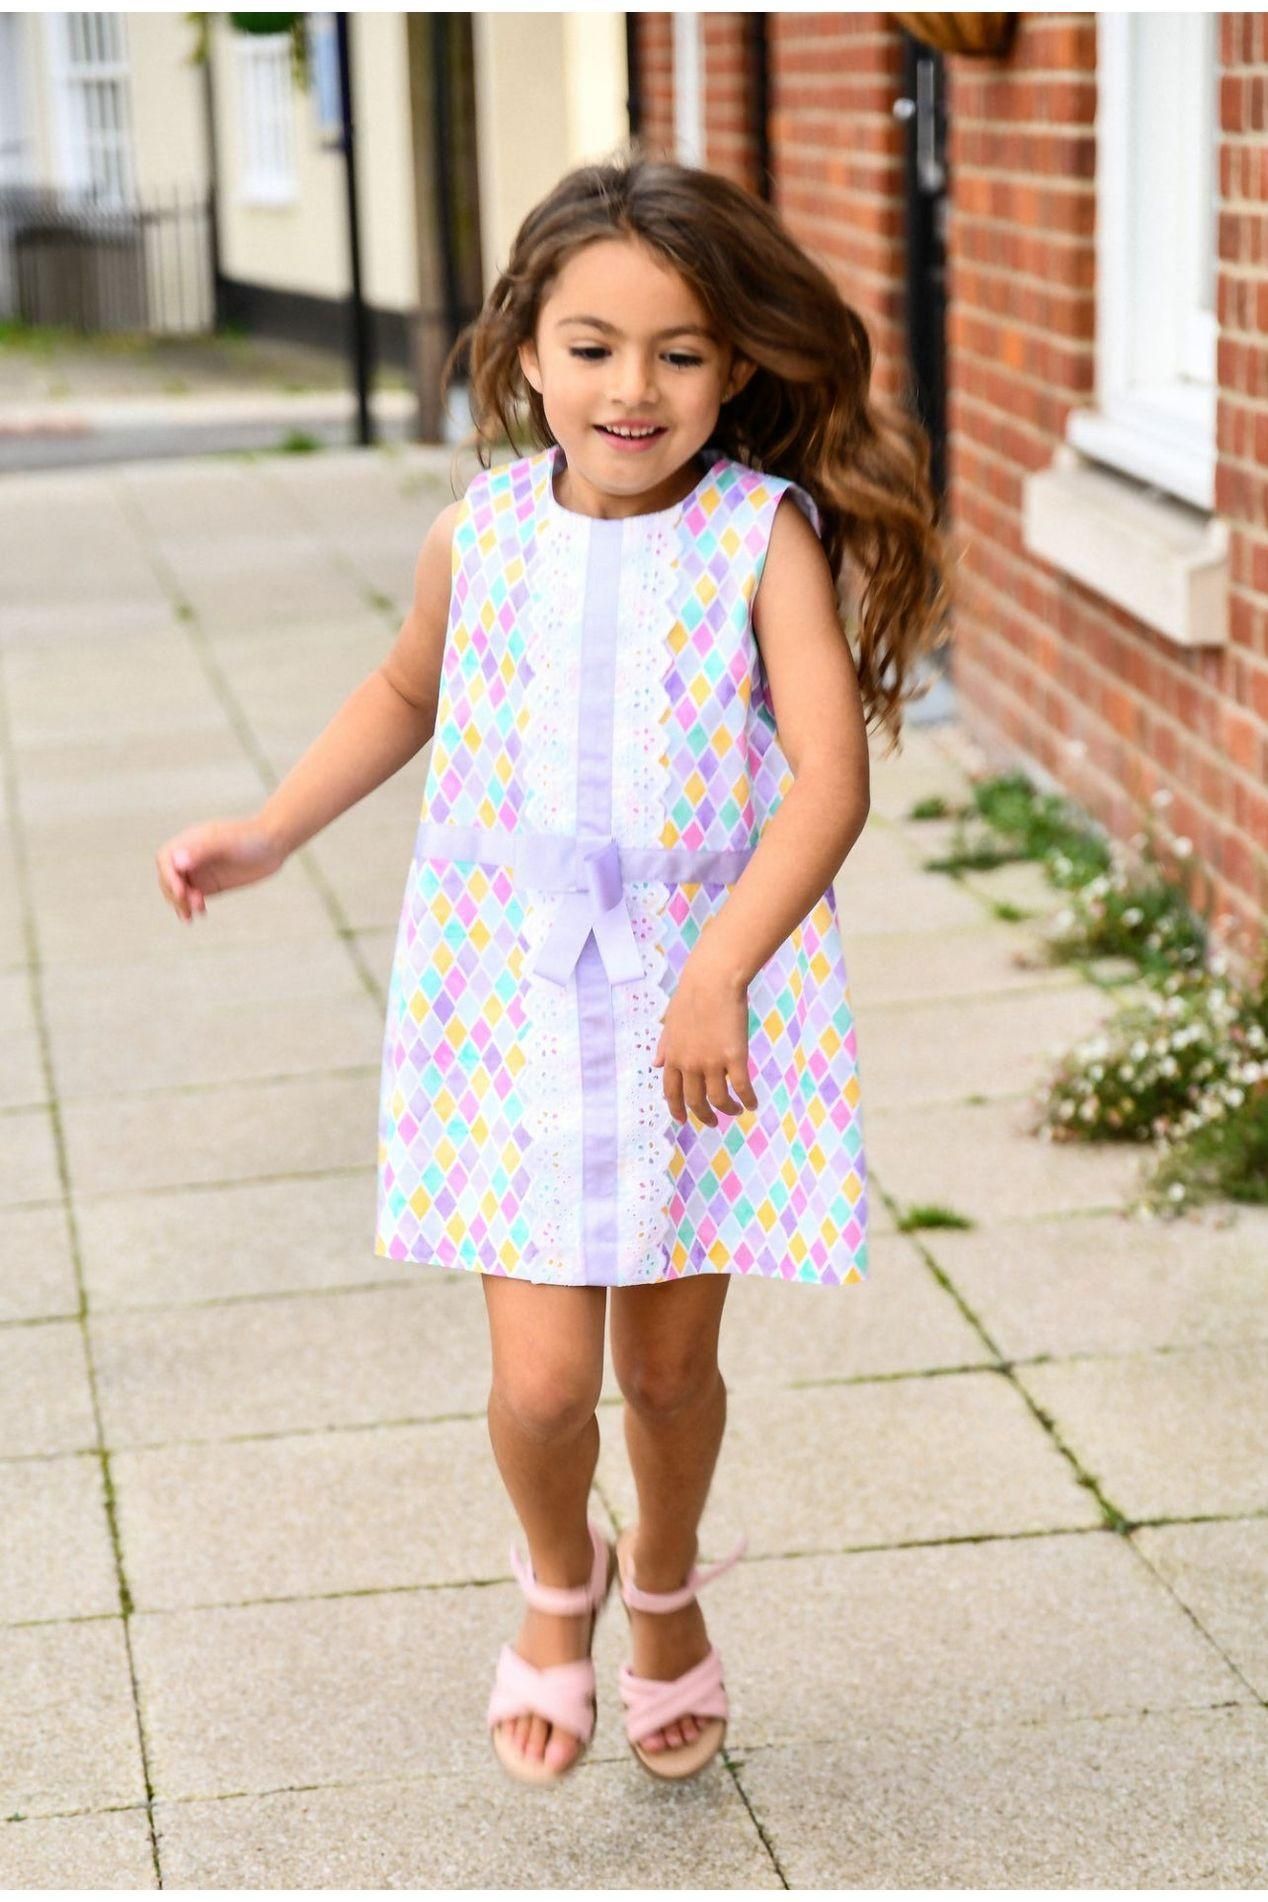 SS24 Rochy Rombos Girls Multi Colour A Line Dress Dainty Delilah 